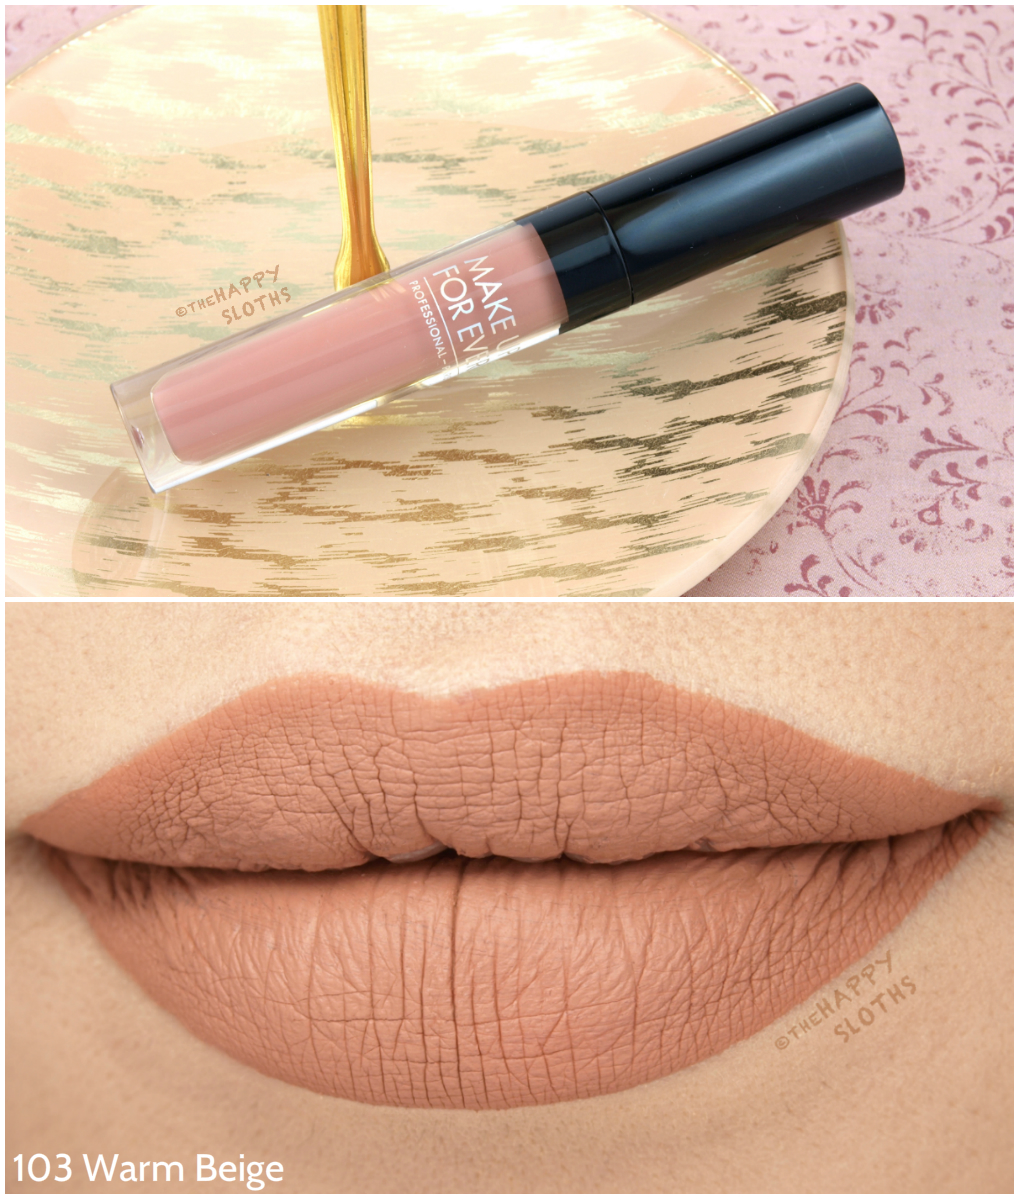 Make Up For Ever Artist Liquid Matte Lipstick in 103 Warm Beige: Review and Swatches